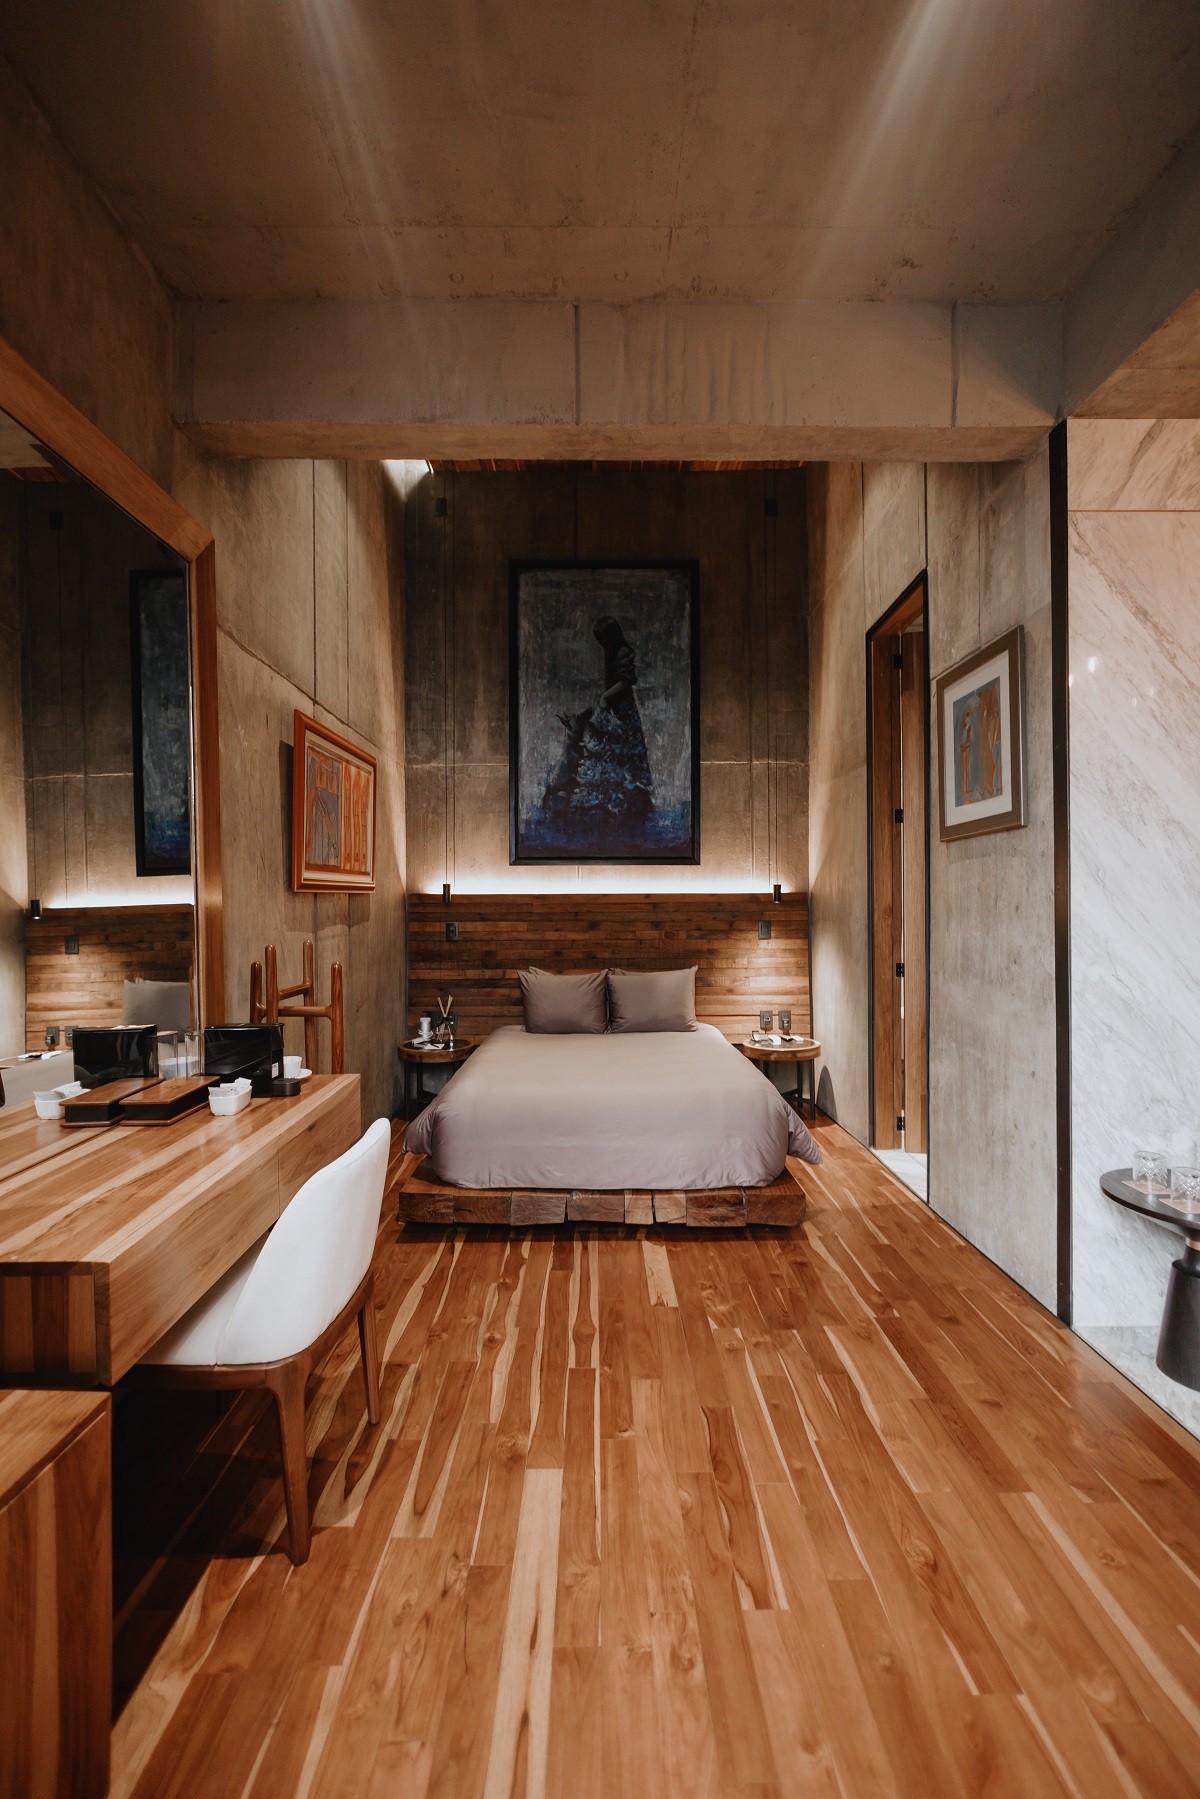 bed in guestroom at hotel Flavia set against concrete walls and on wooden floors